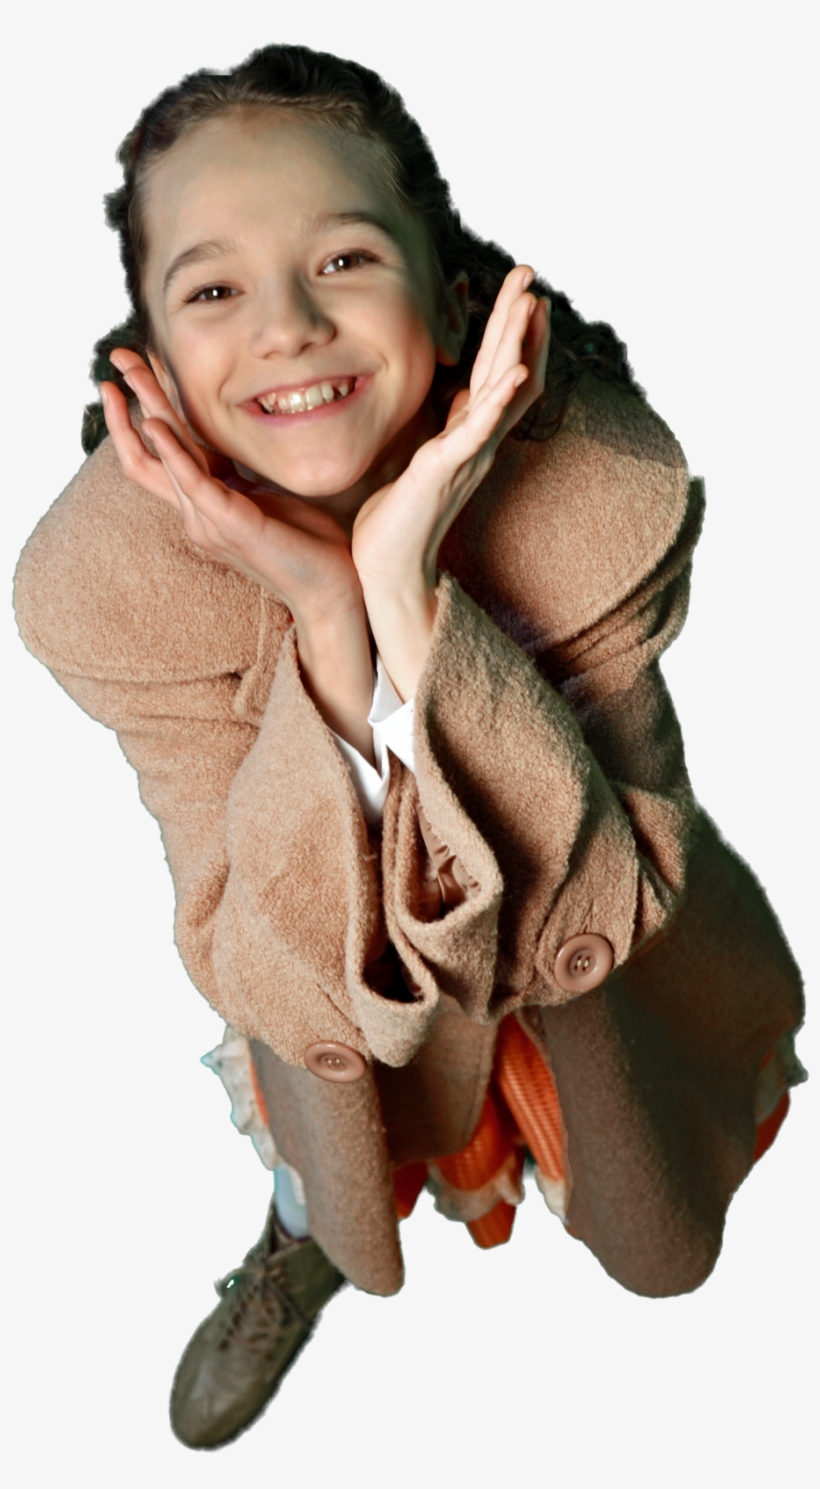 Photos By Aaron Zulliger, Happy Trails Productions - Toddler, transparent png #1879910